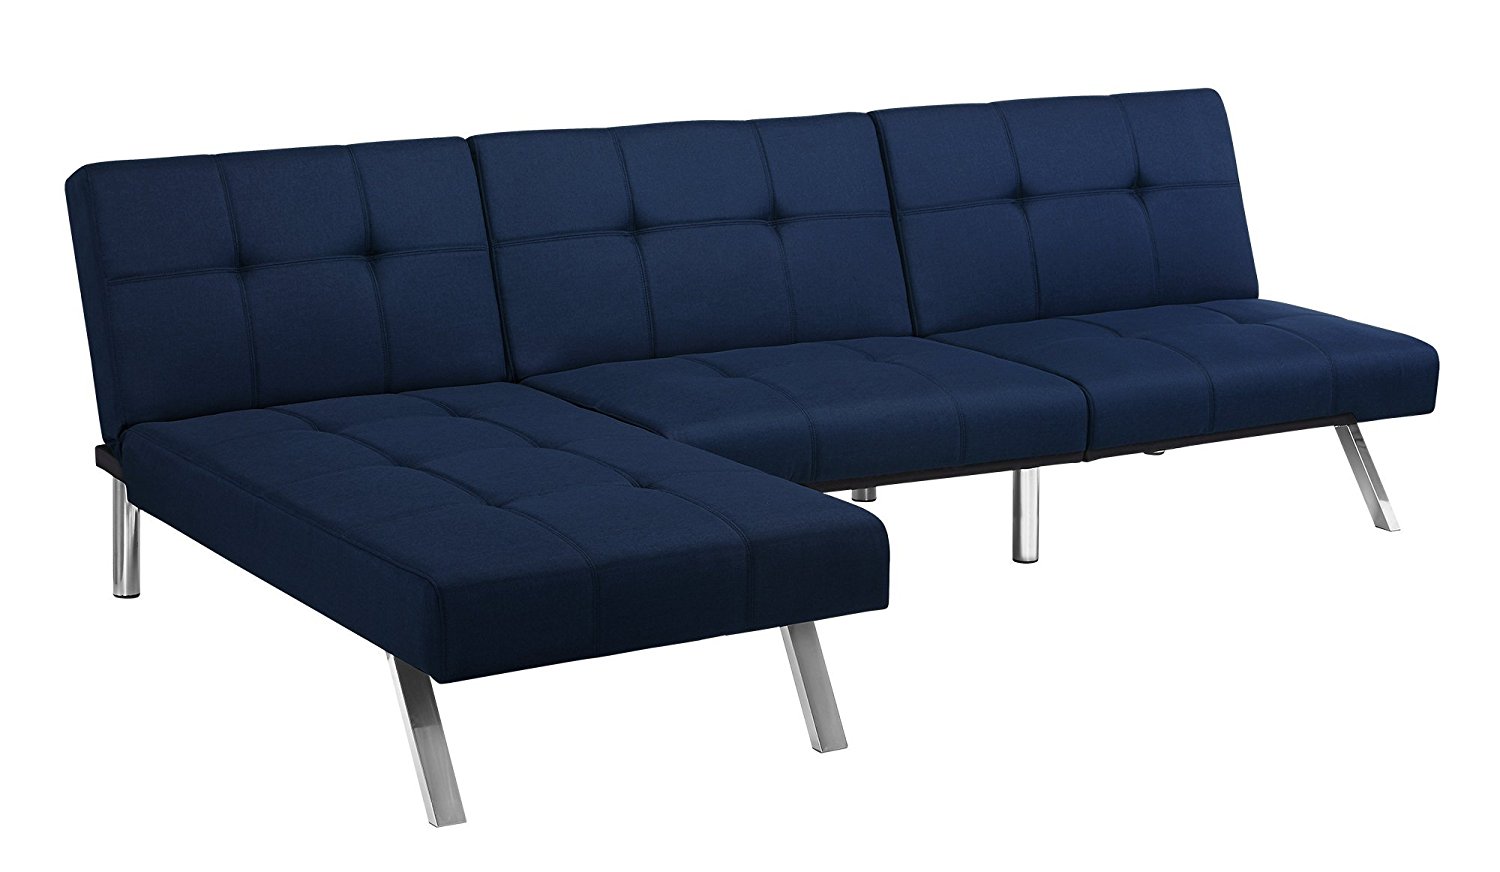 Layton Chaise Lounge Sofa Sectional in Premium Linen, Available in Navy and Tan with Slanted Chrome Legs (Chaise, Navy)